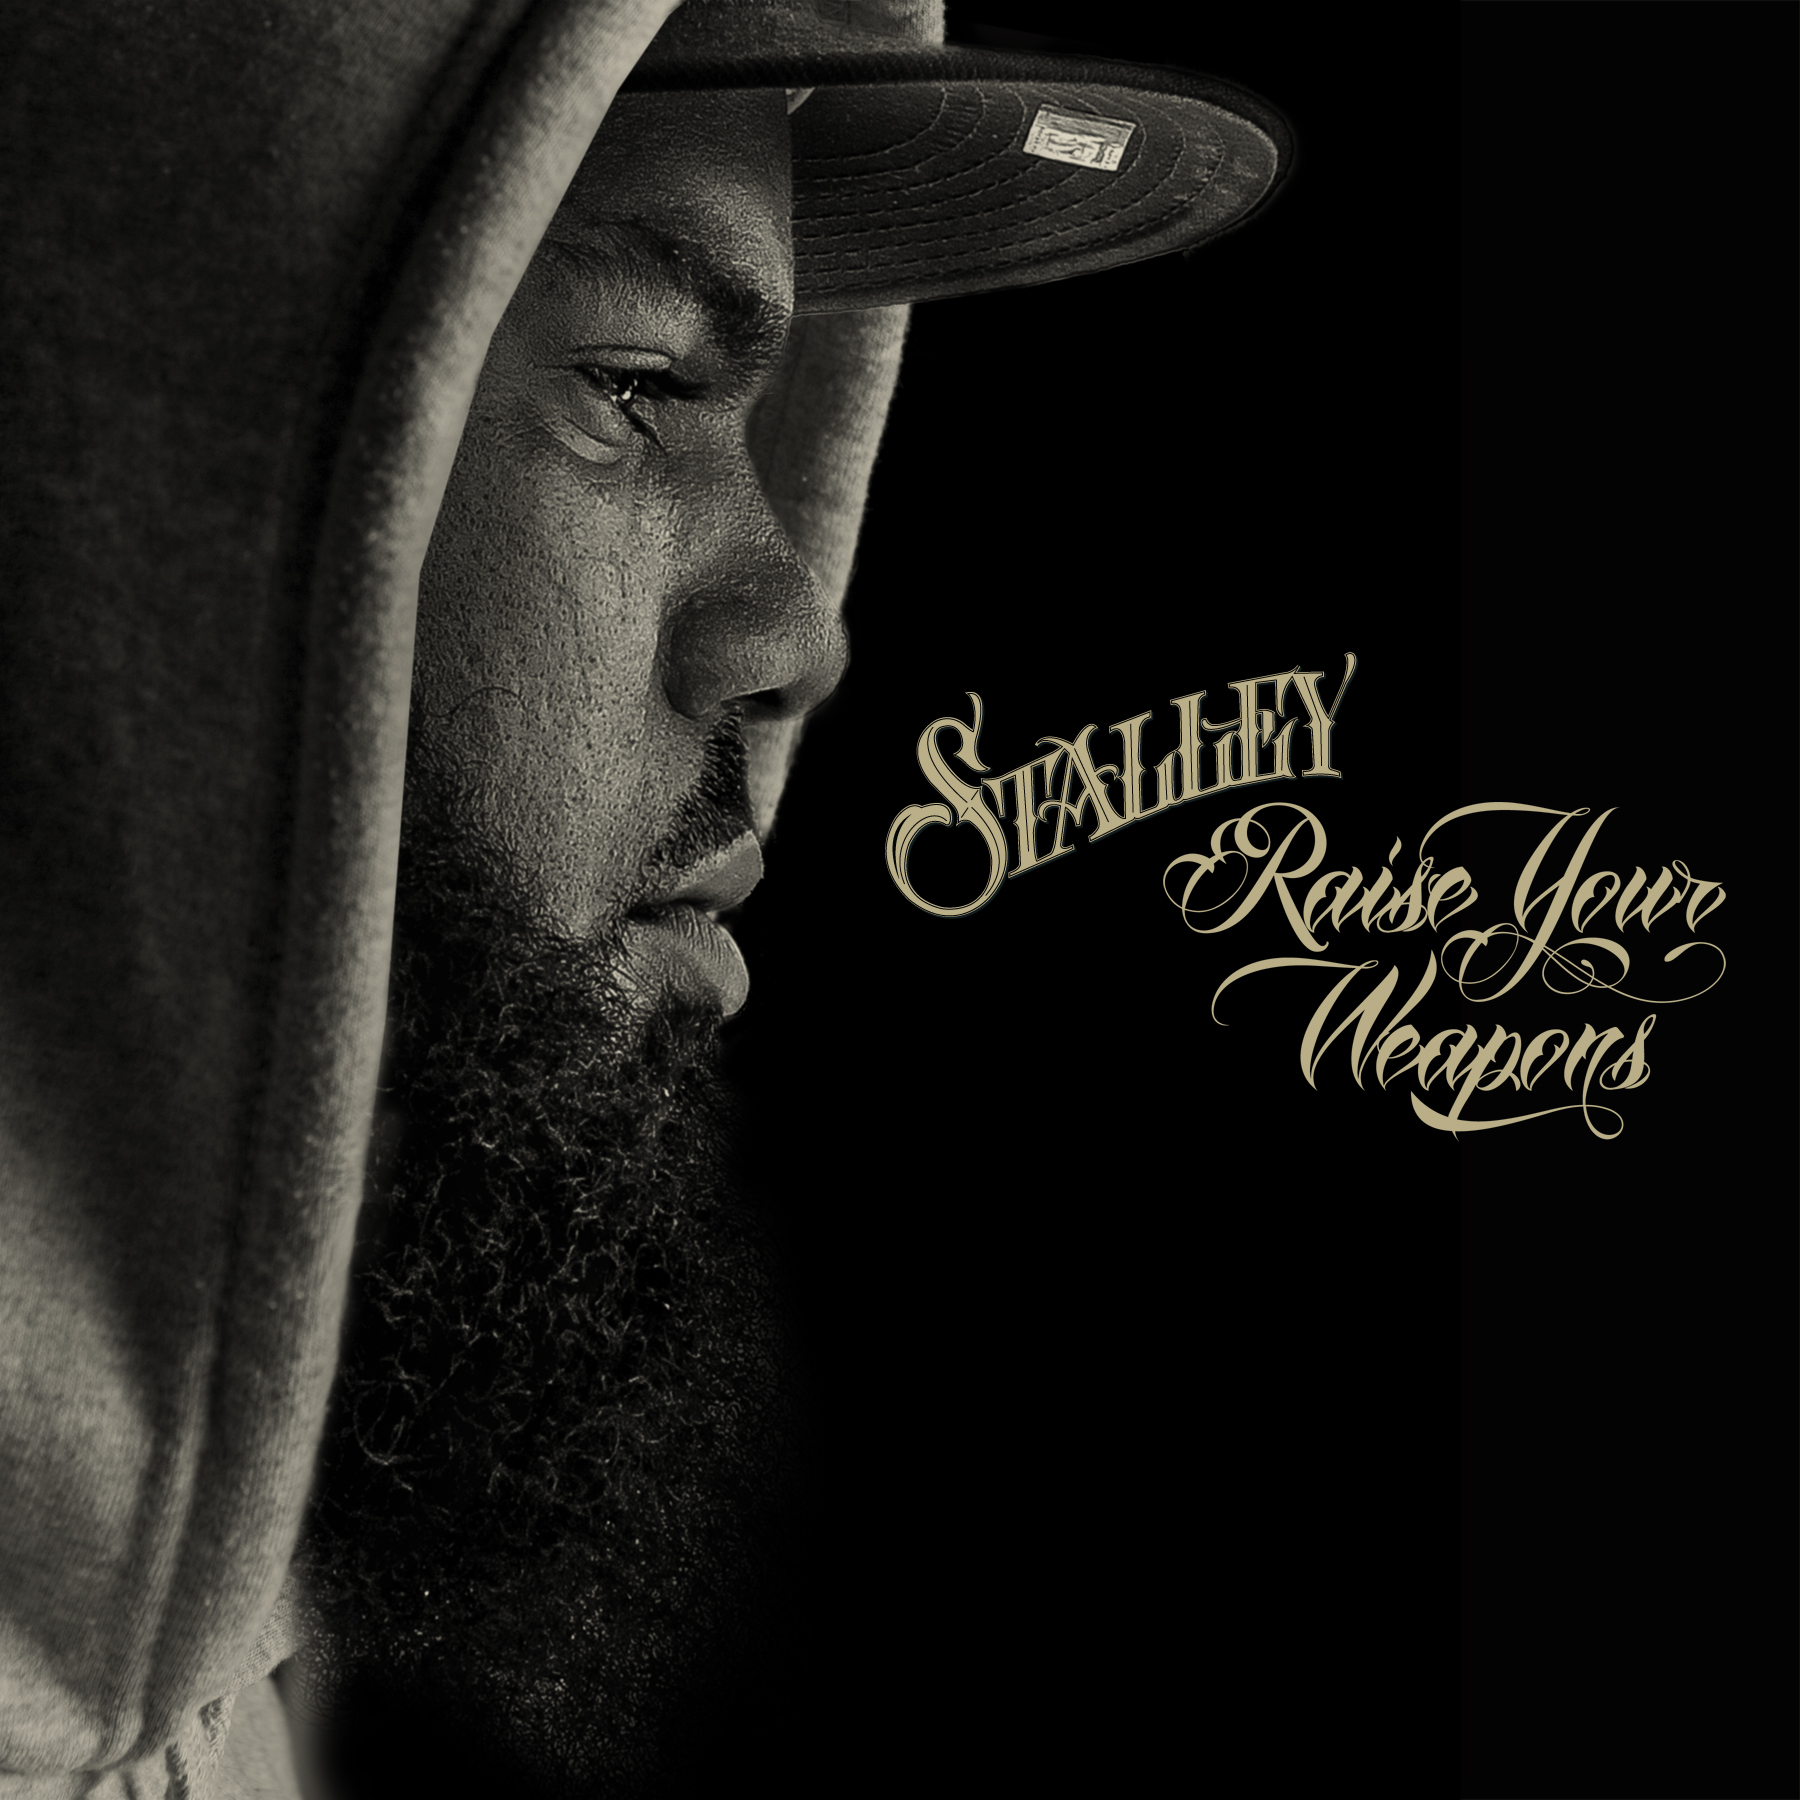 stalley-raise-your-weapons-HHS1987-2013 Stalley - Raise Your Weapons  